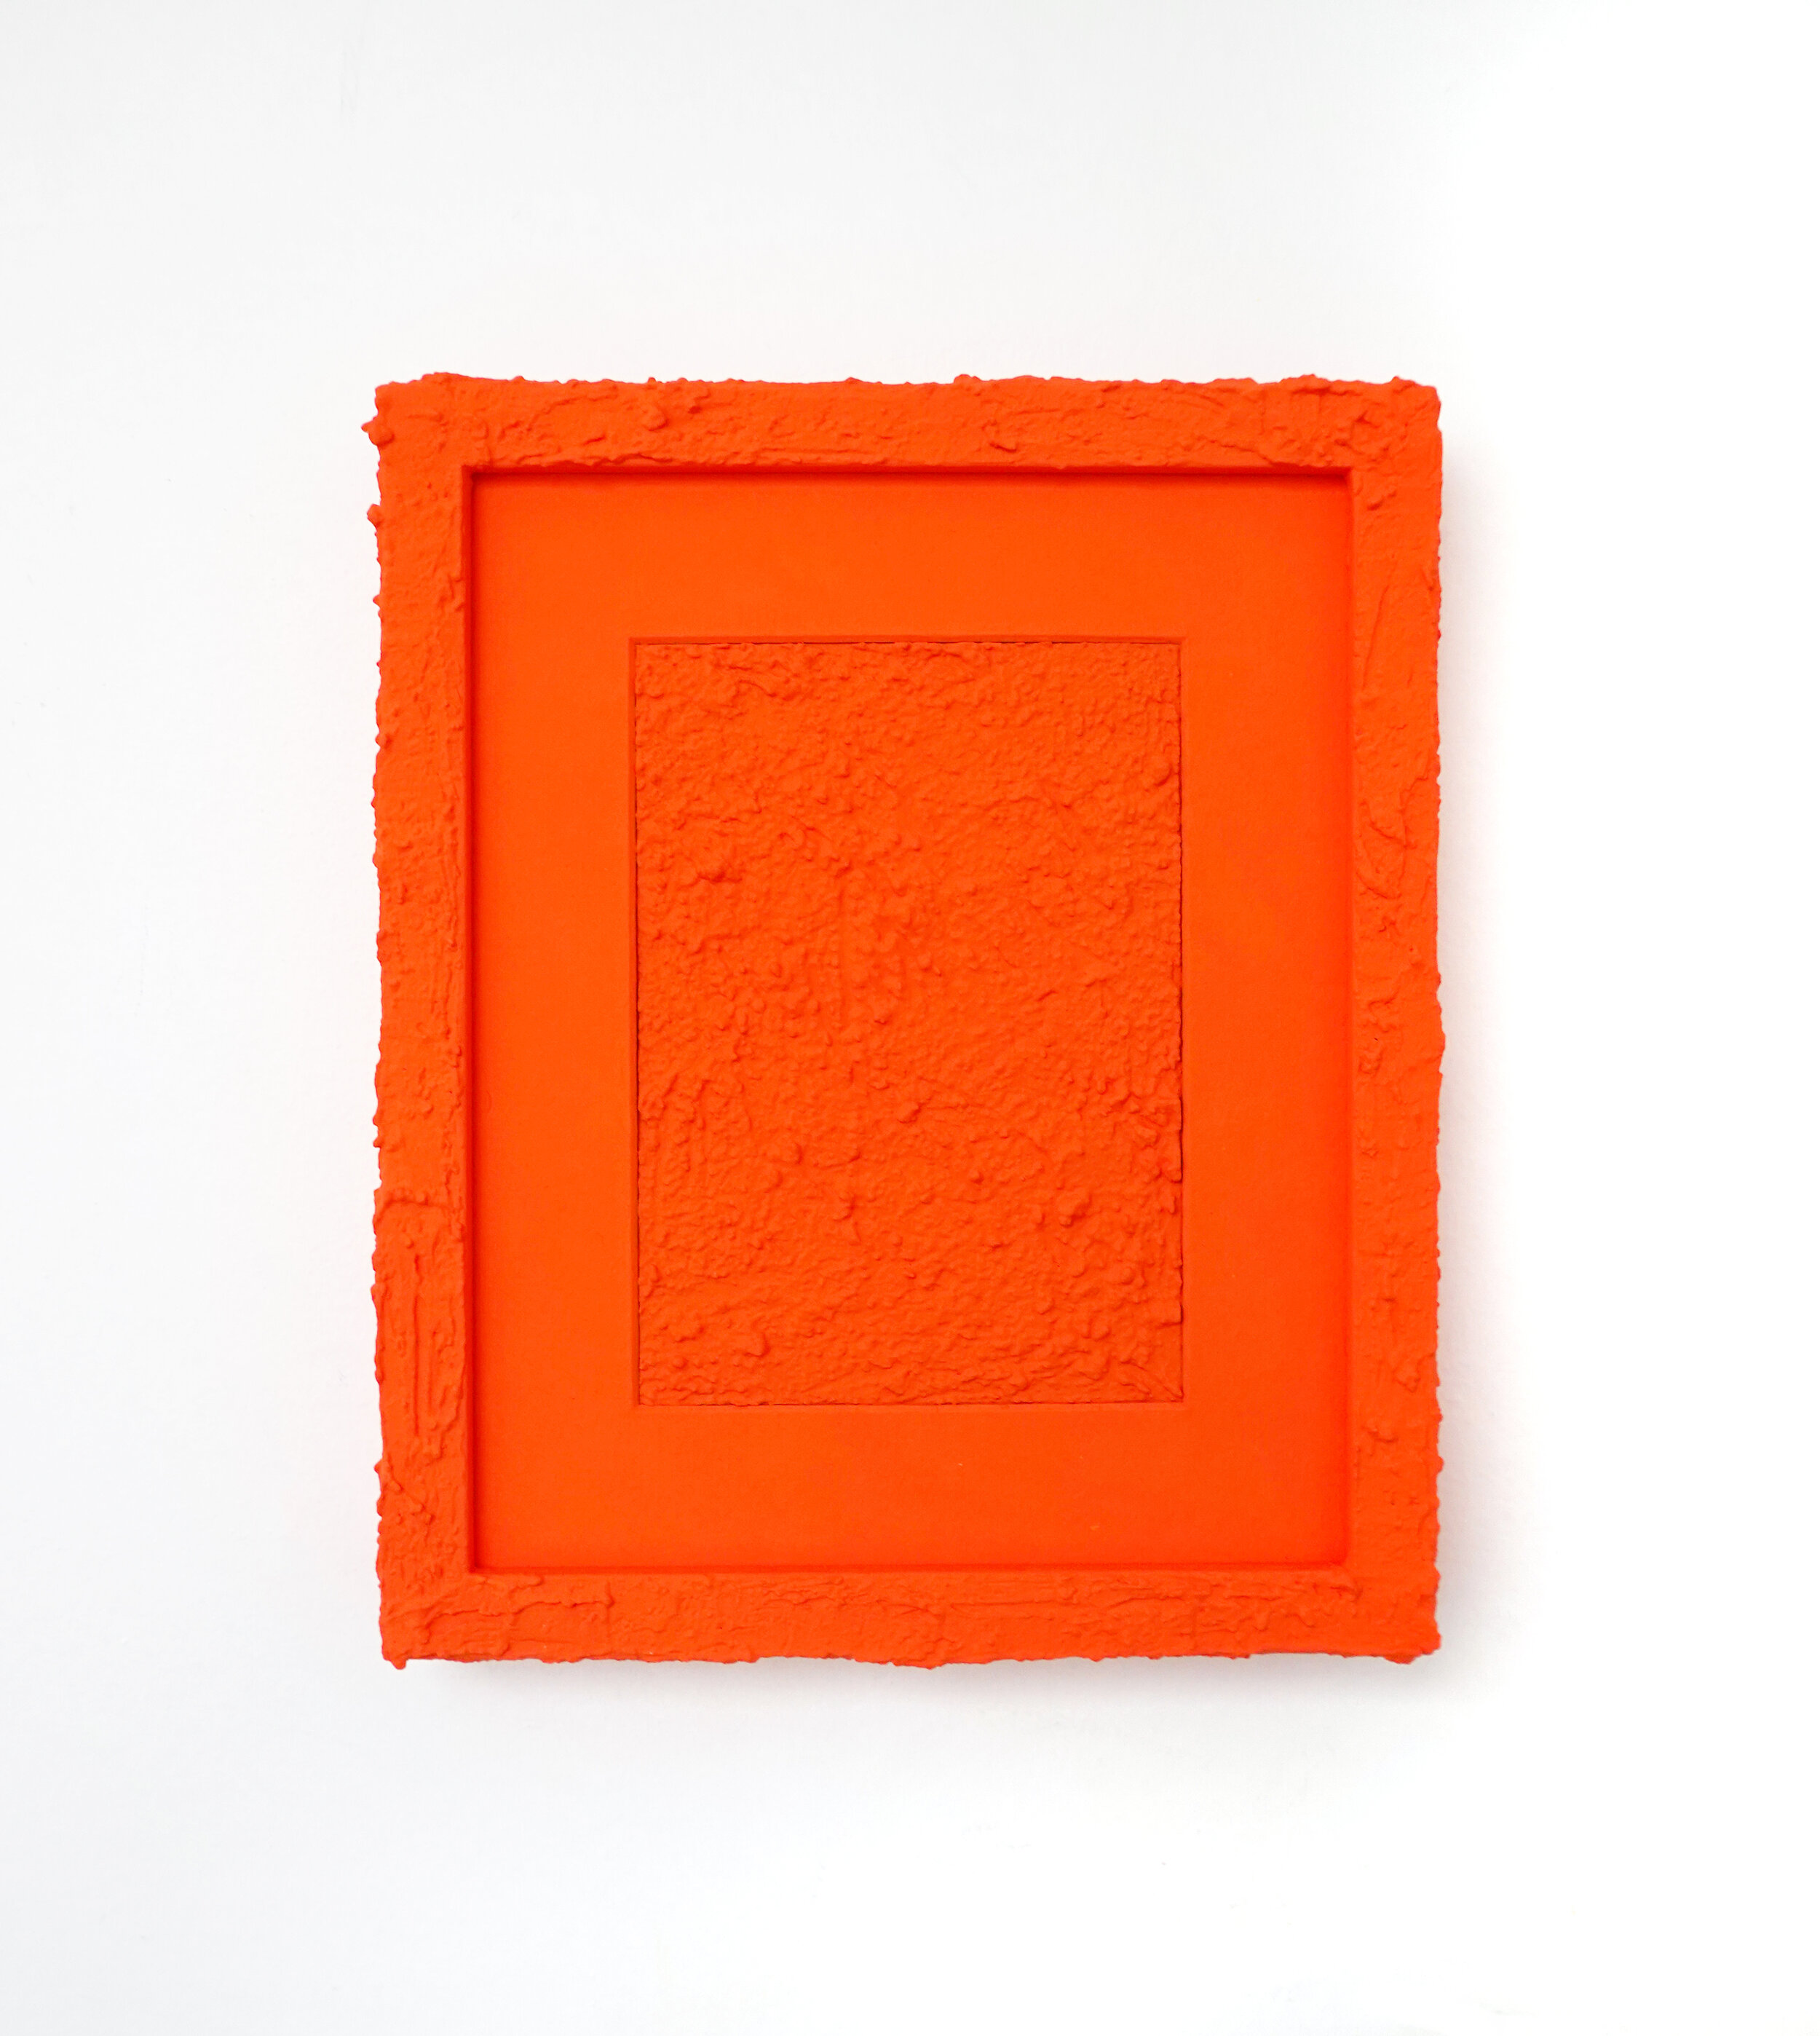  Wall within a wall (Orange), 2020, acrylic, flashe, and stucco on paper and wood, 11.5 x 9.5” 